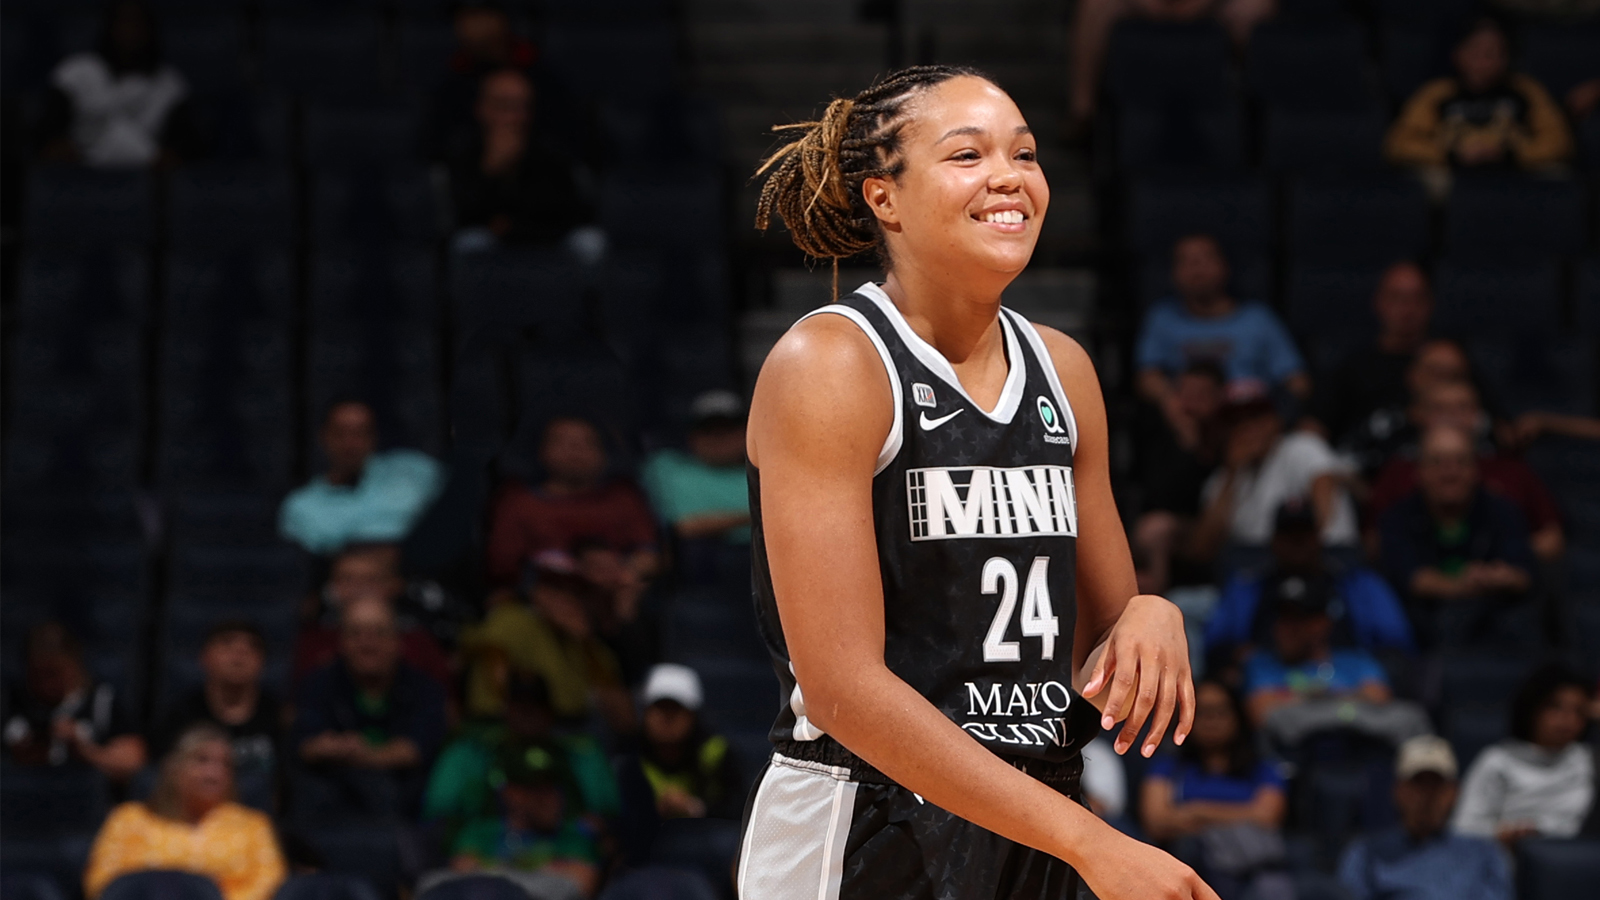 WNBA player smiling on the court